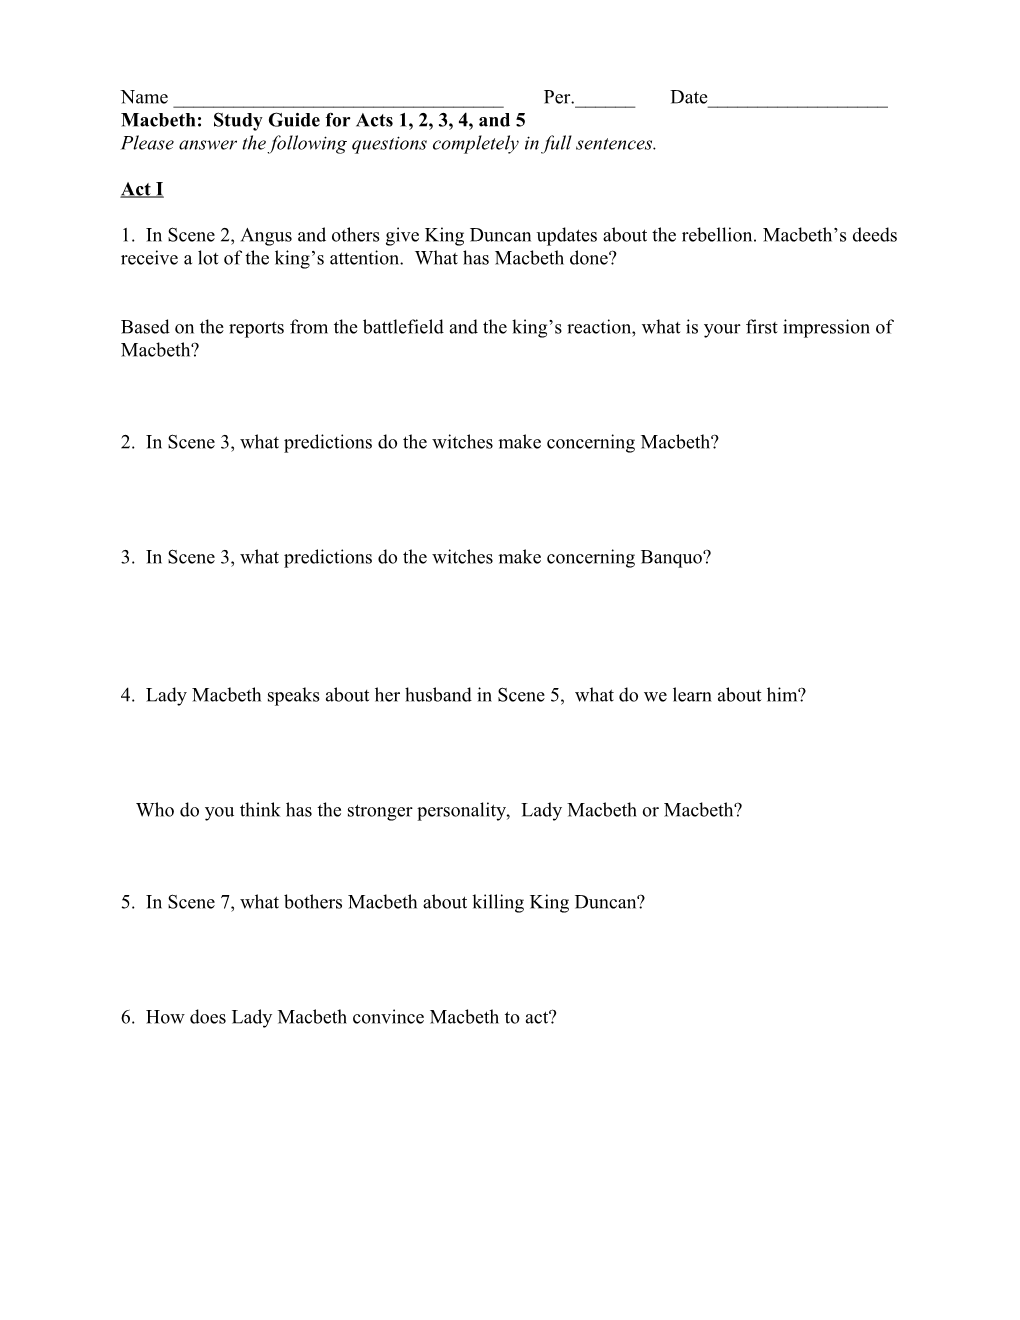 Macbeth: Study Guide for Acts 1, 2, 3, 4, and 5